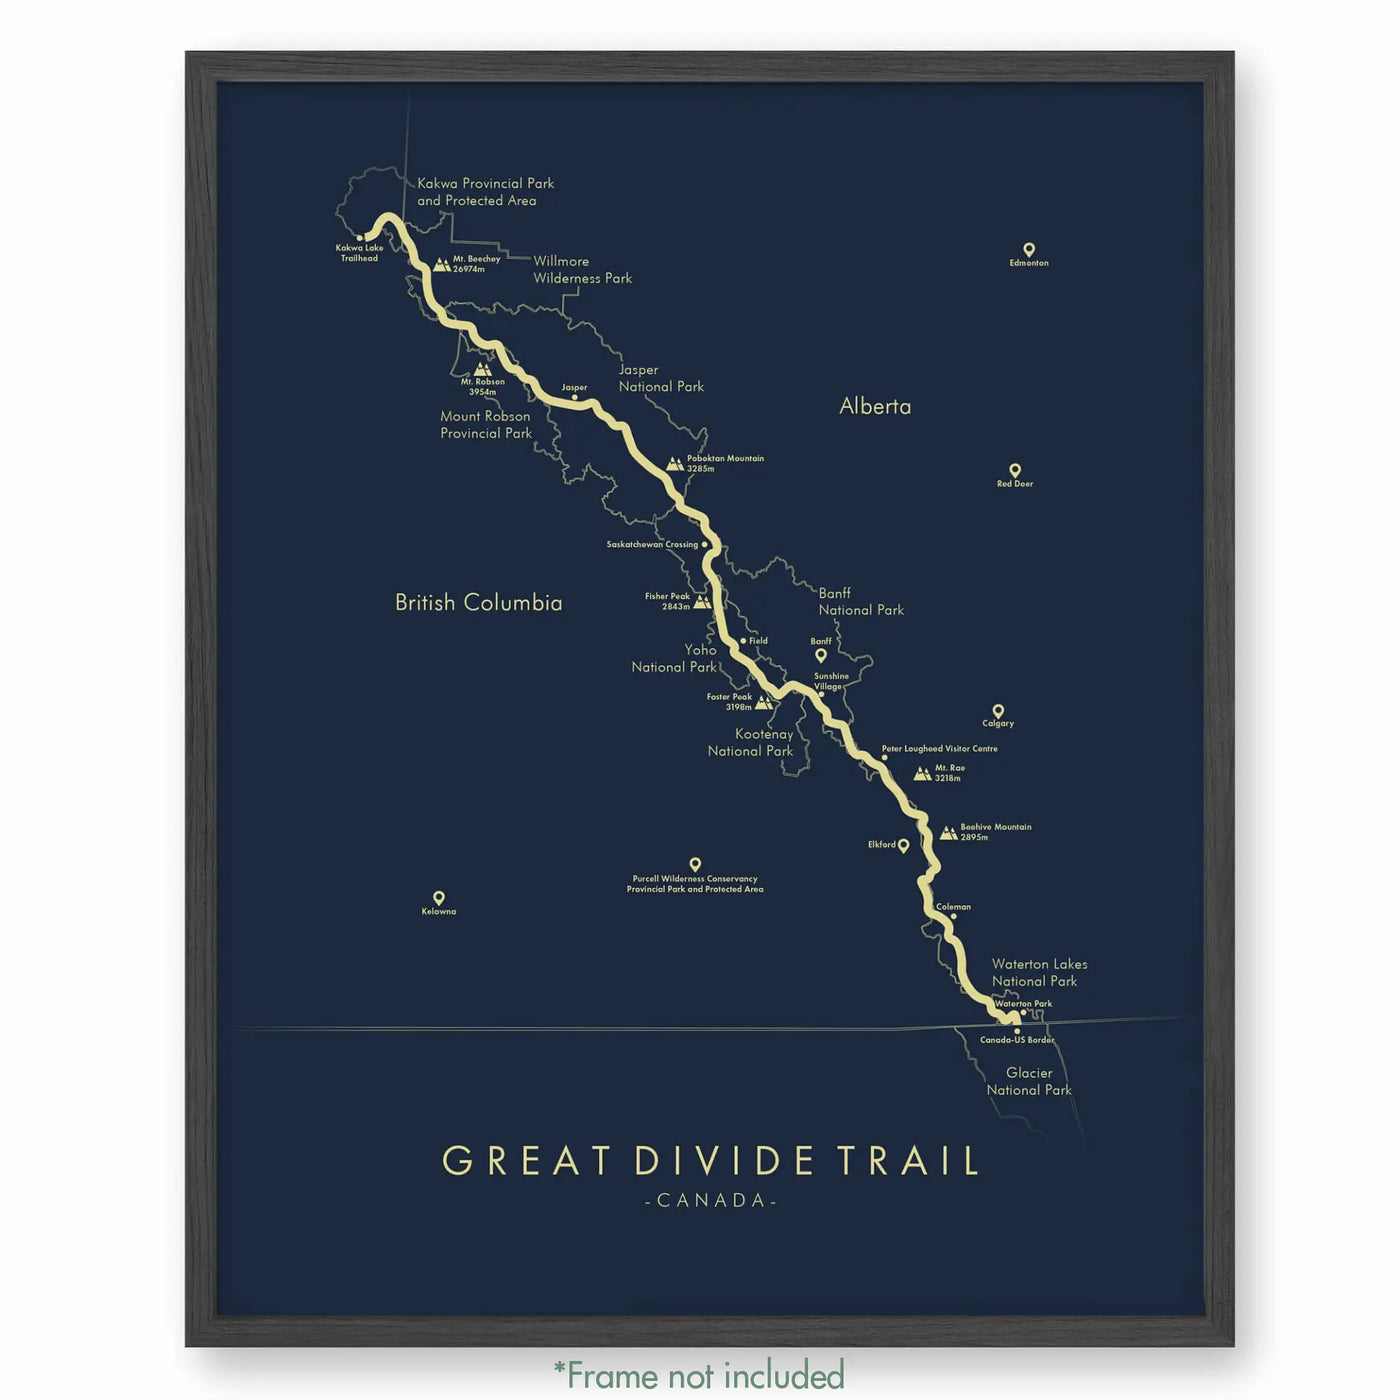 Trail Poster of Great Divide Trail - Blue